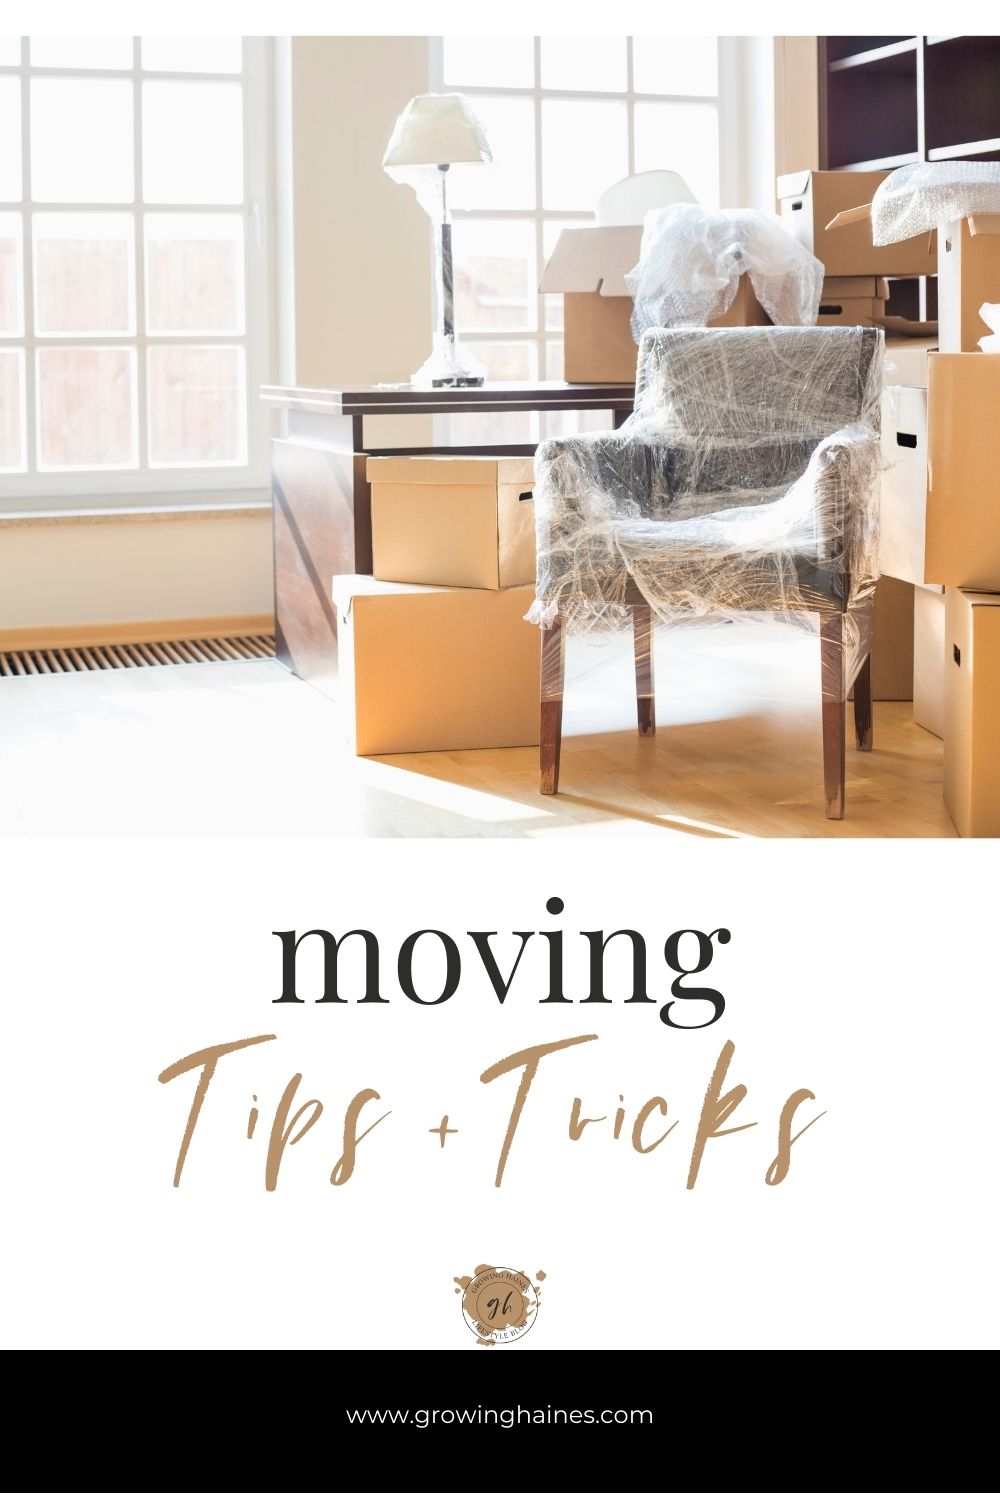 Growing Haines |  Moving Tips + Tricks